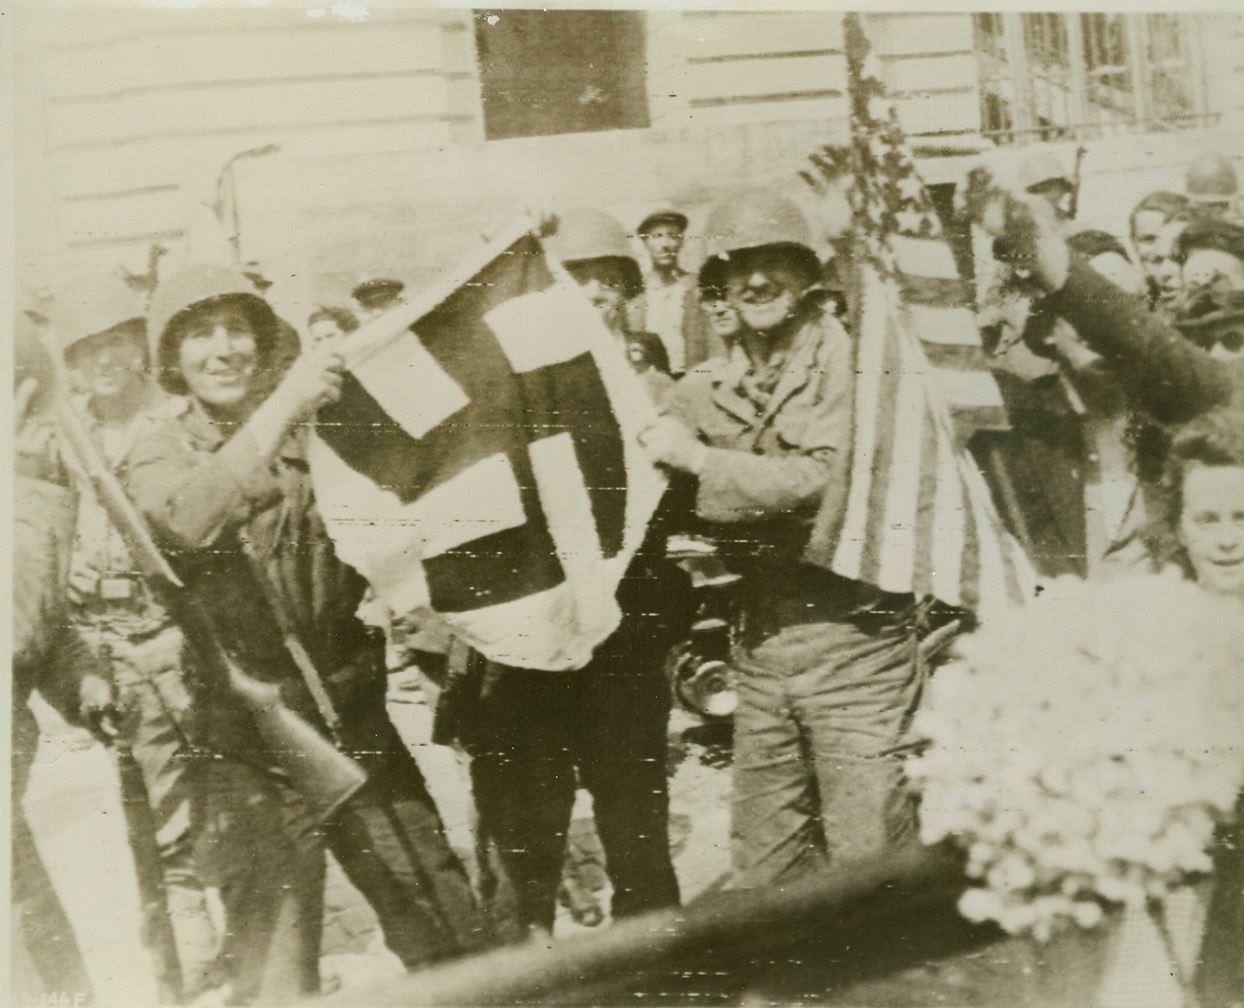 She’ll Wave No More, 8/6/1944. Rennes, France—Smiling Yanks hold the flag that will fly no longer over liberated Rennes, capital of Brittany and largest French town to fall to the Allies to date. Beside the deposed Swastika, someone waves the Stars and Stripes, which, with the Tricolor, now waves over the city. Credit: Signal Corps radiotelephoto from ACME;